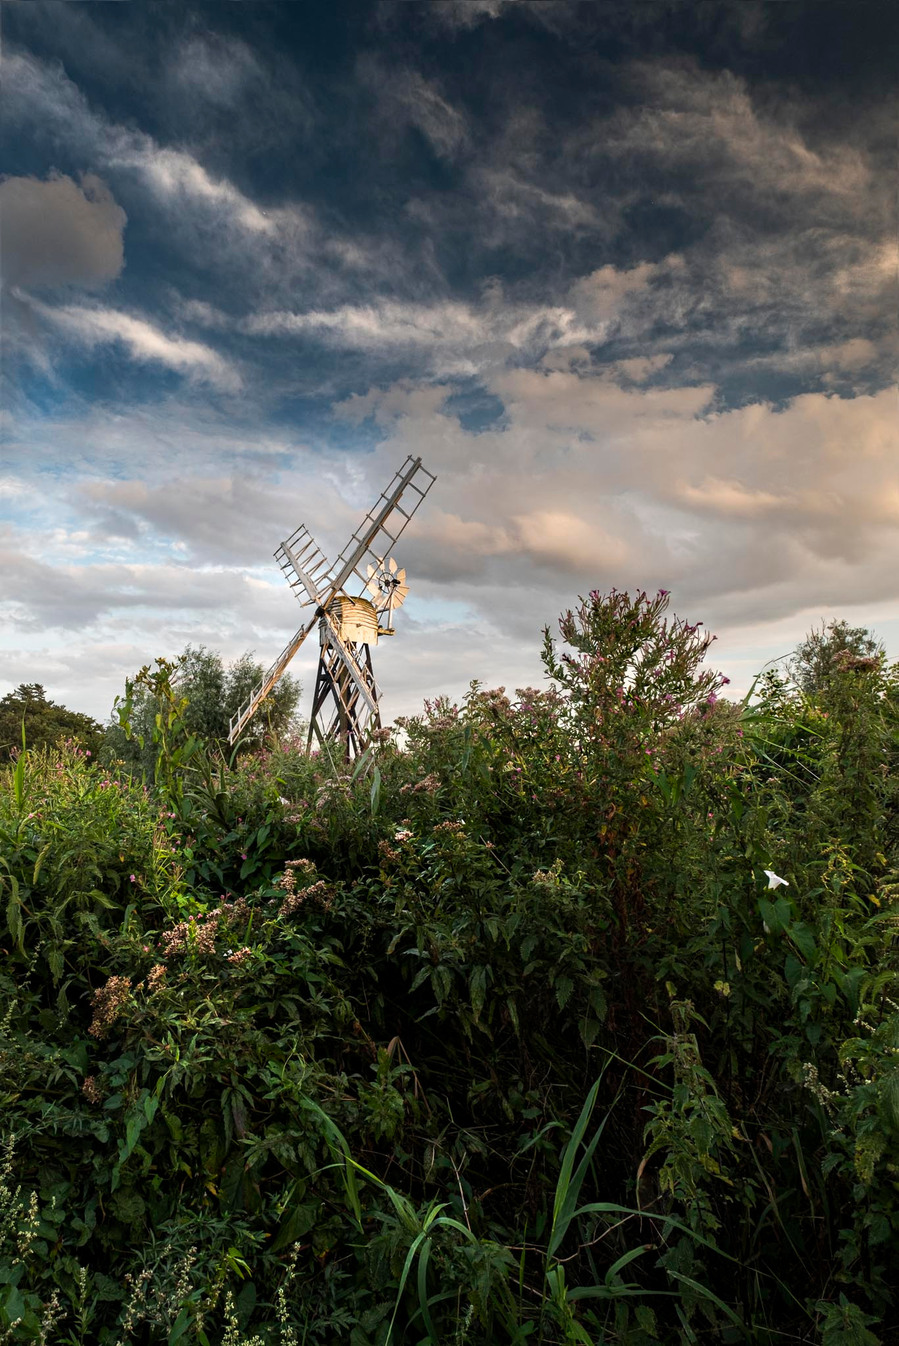 Norfolk broads windmill at how hill surrounded by green vegetation and fluffy white clouds at sunset as the sun illuminates the windmills sails